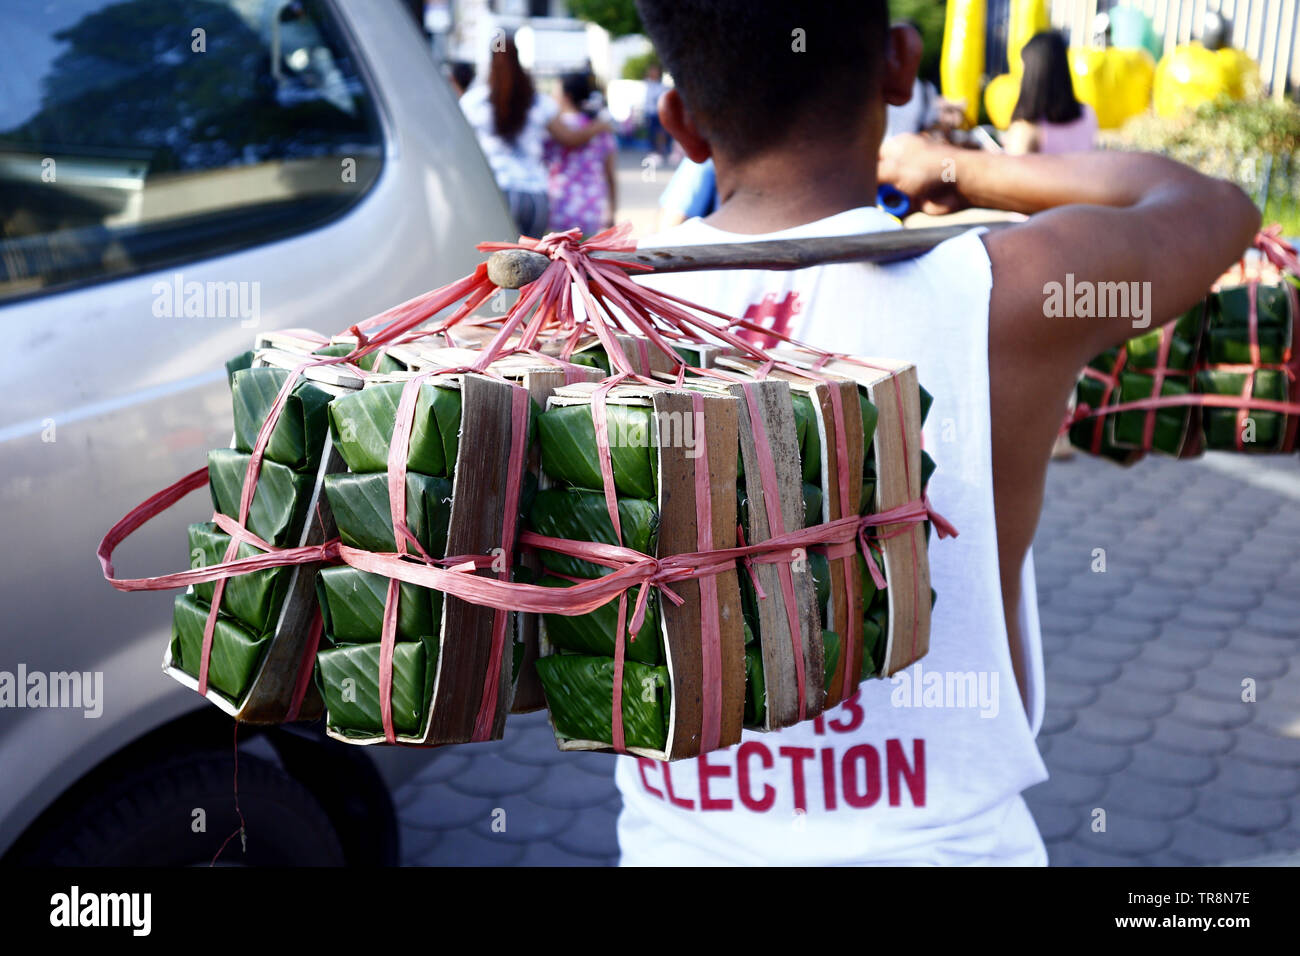 ANTIPOLO CITY, PHILIPPINES – MAY 30, 2019: A street vendor peddles Kesong Puti or cheese made from carabao milk wrapped in banana leaves at a public p Stock Photo